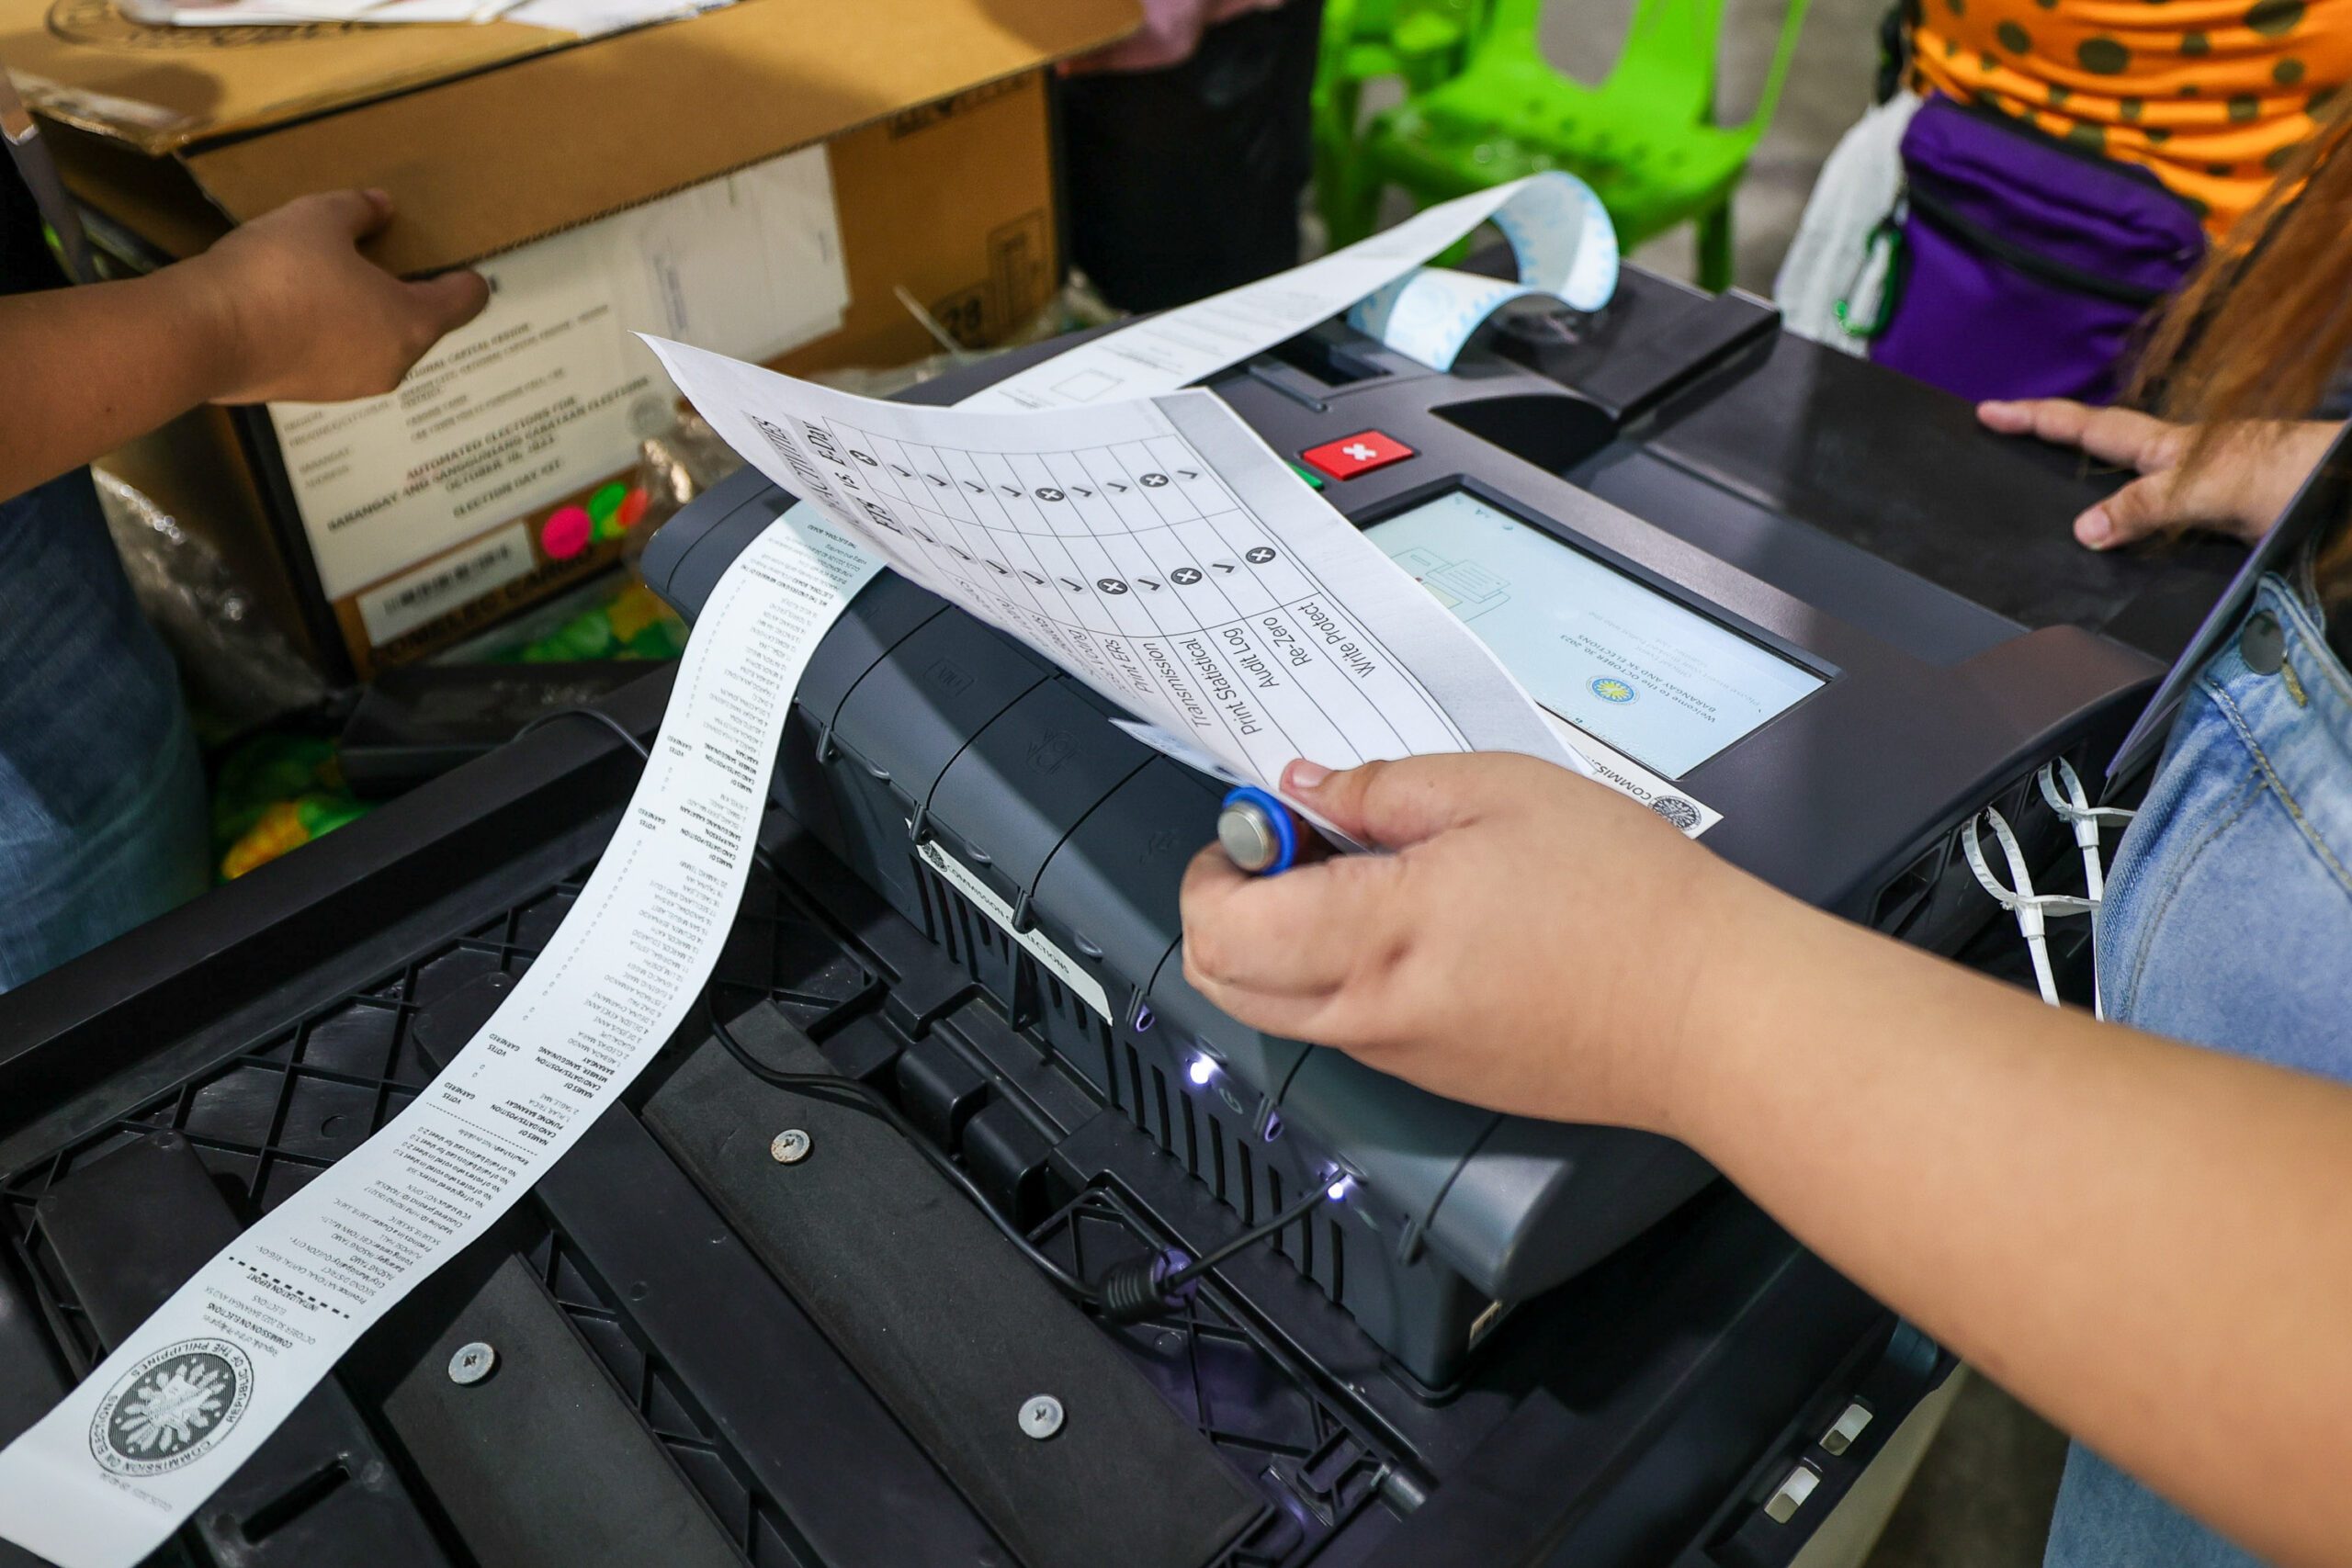 SC junks petition seeking public consultation by Comelec on automated system